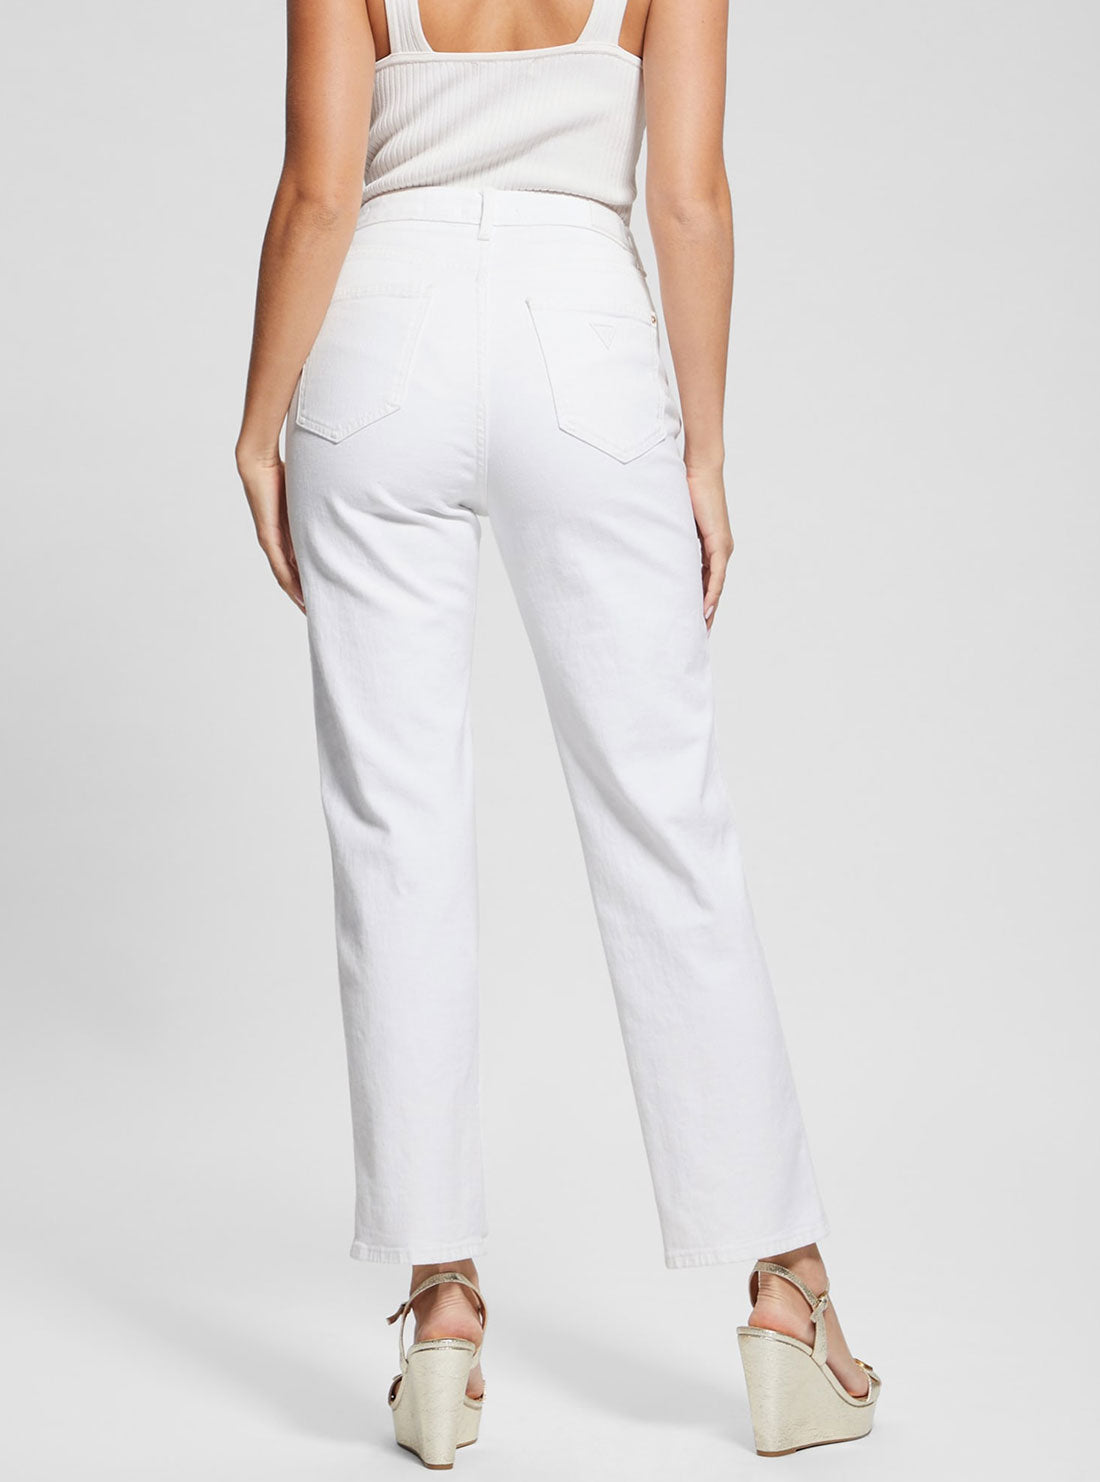 GUESS High-Rise Straight Leg Relaxed Jeans in White Wash back view